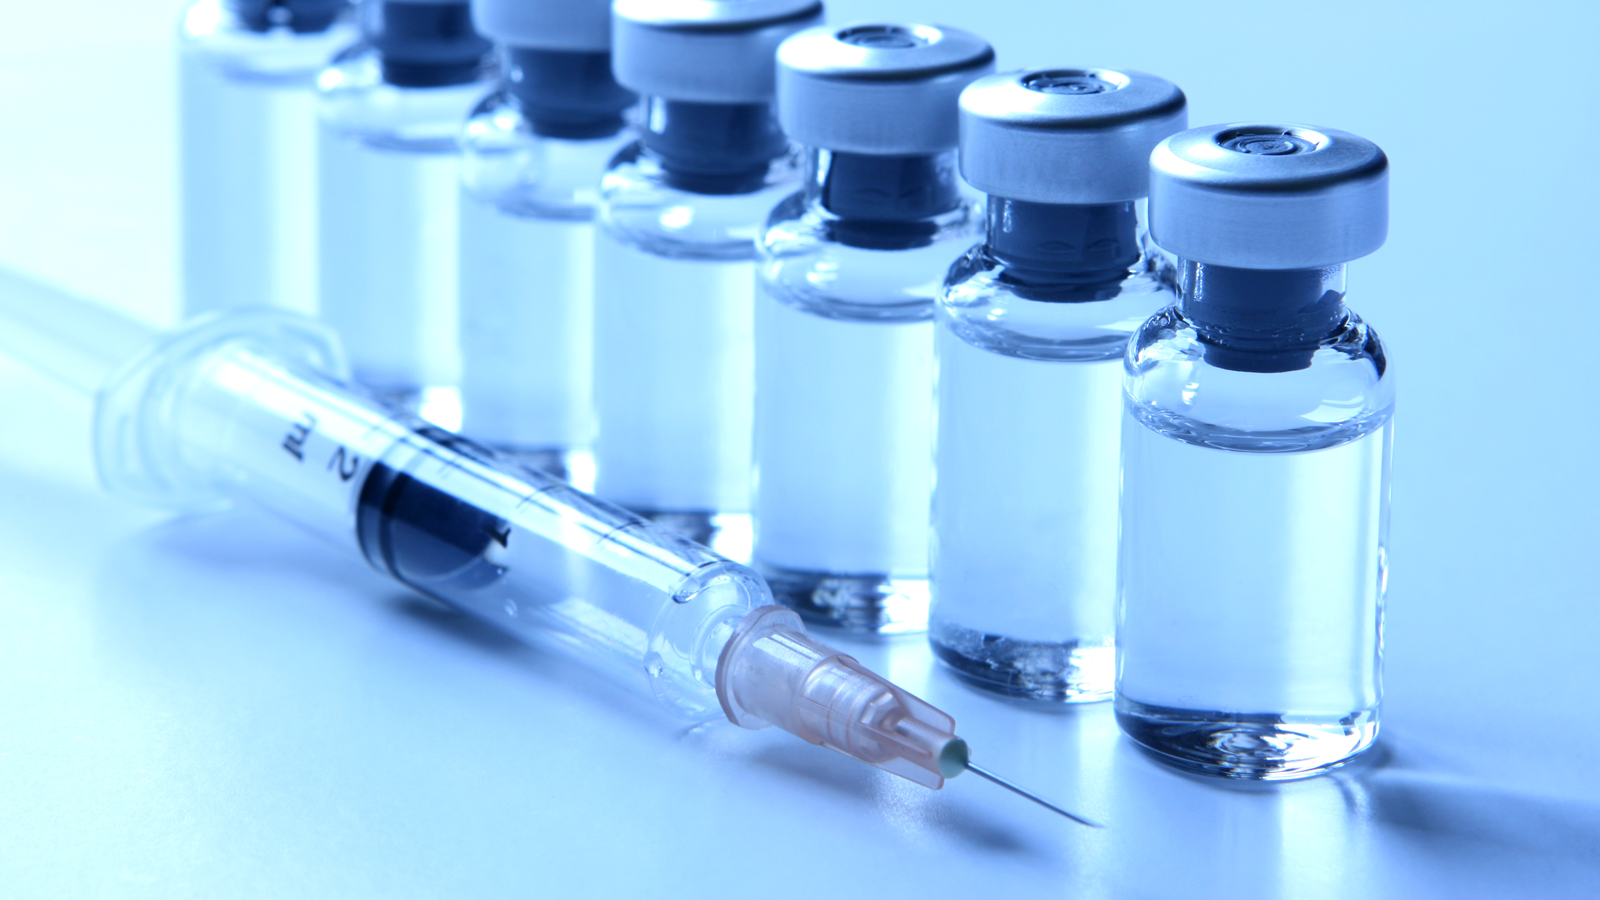 a row of seven small glass medical vials containing clear liquid and a medical syringe used for injecting vaccines